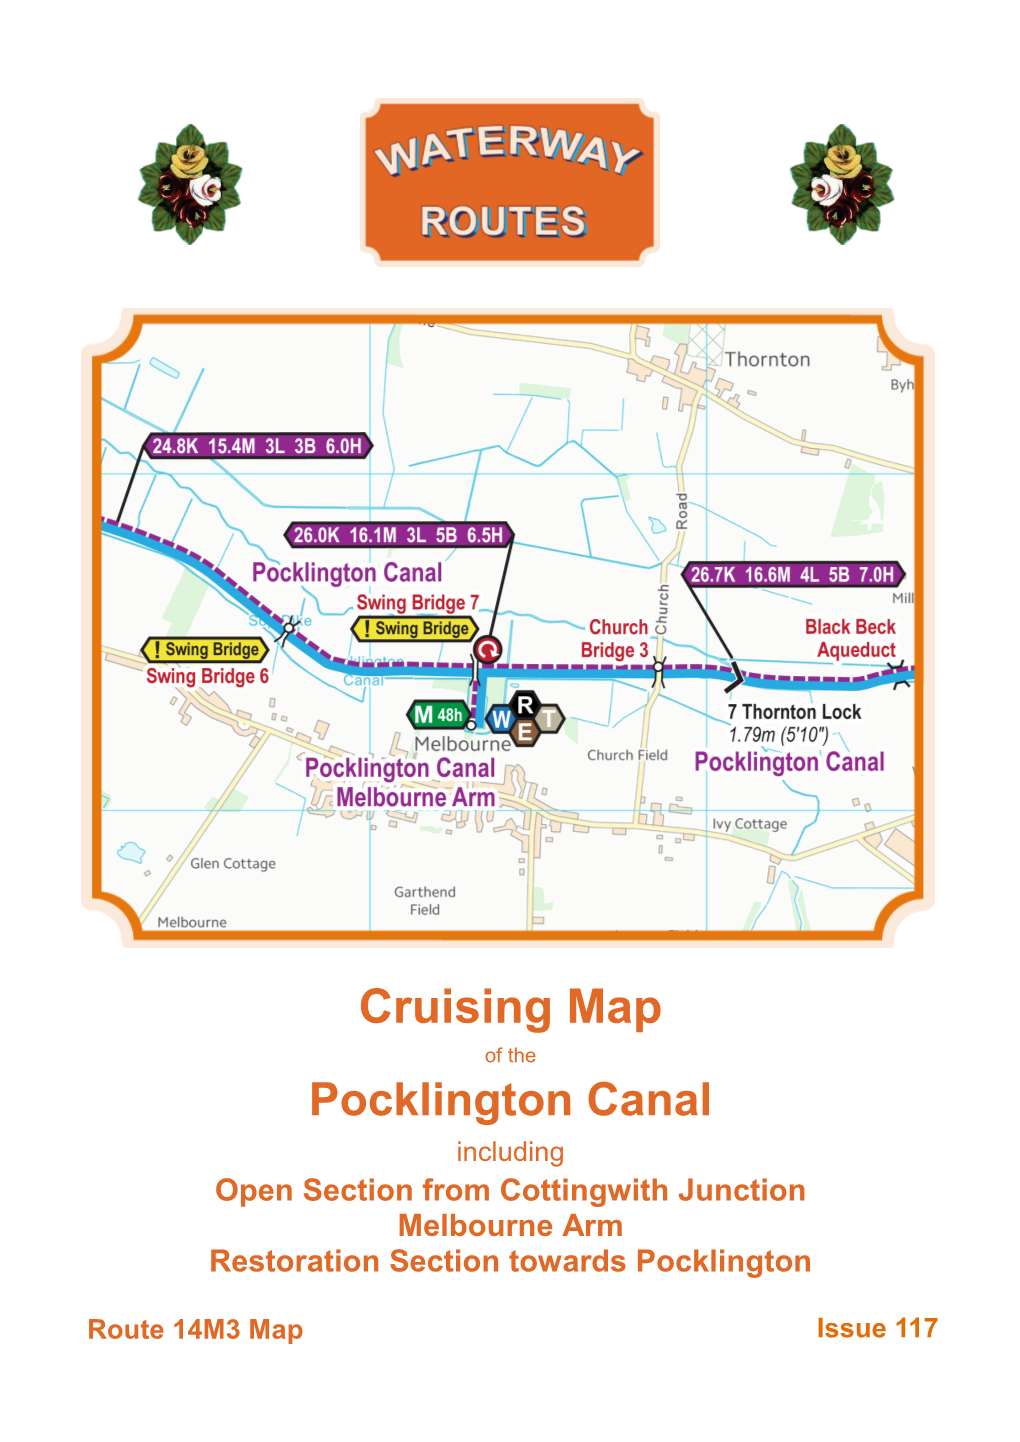 Cruising Map of the Pocklington Canal Including Open Section from Cottingwith Junction Melbourne Arm Restoration Section Towards Pocklington